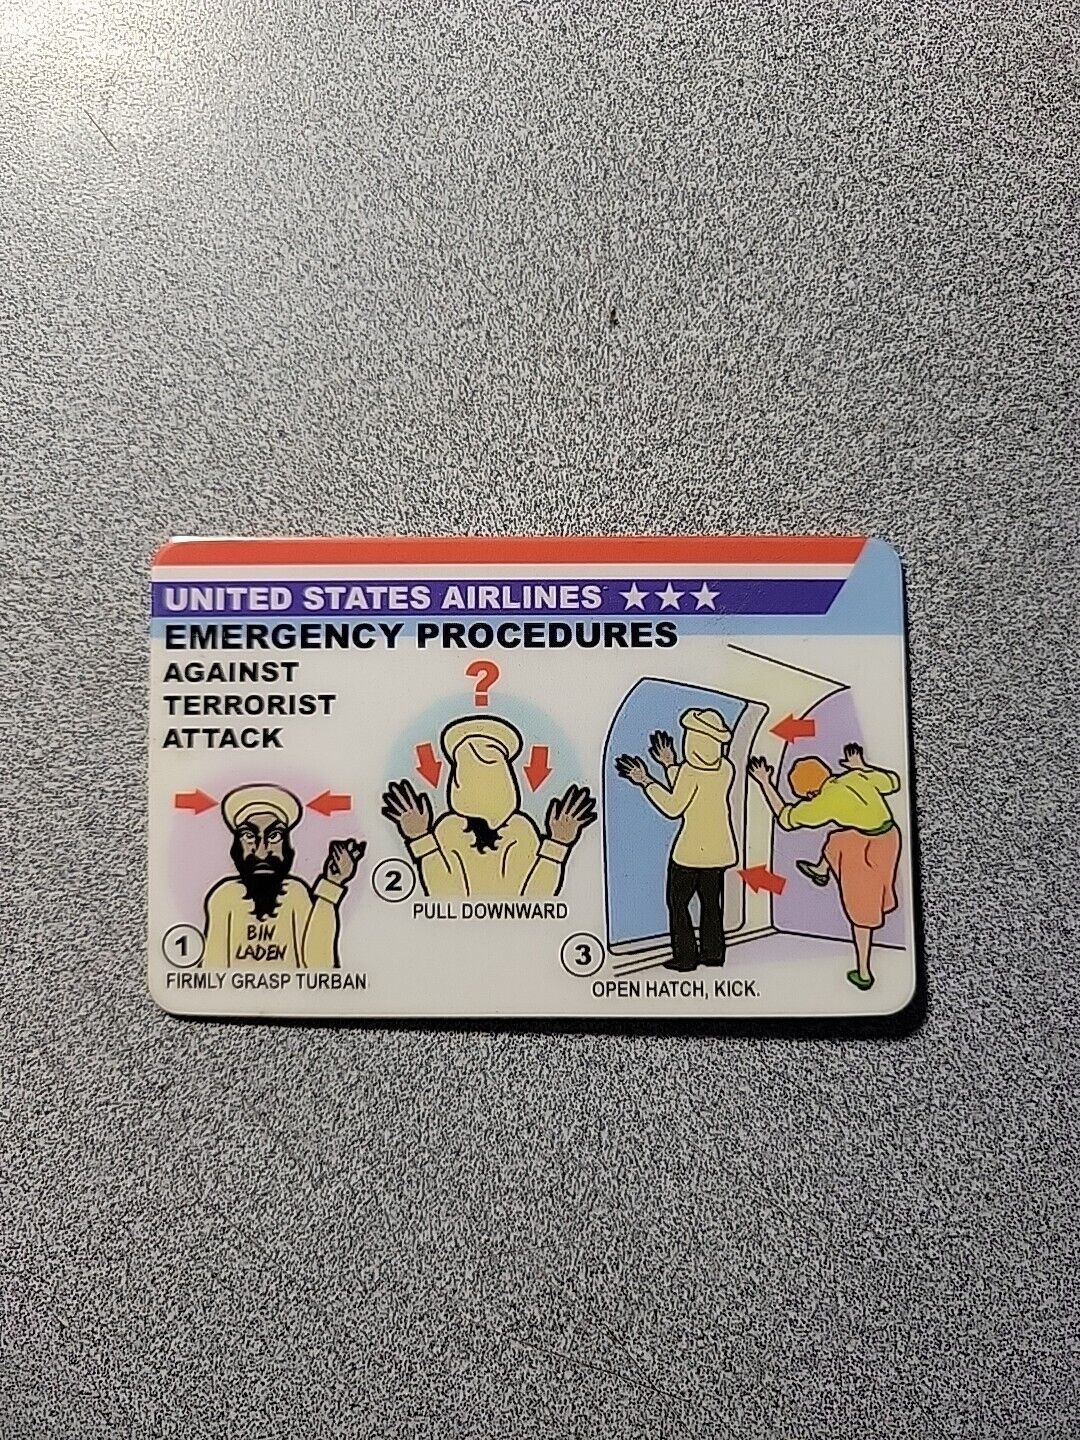 United States Airlines Emergency Procedures ID Card. Novelty.